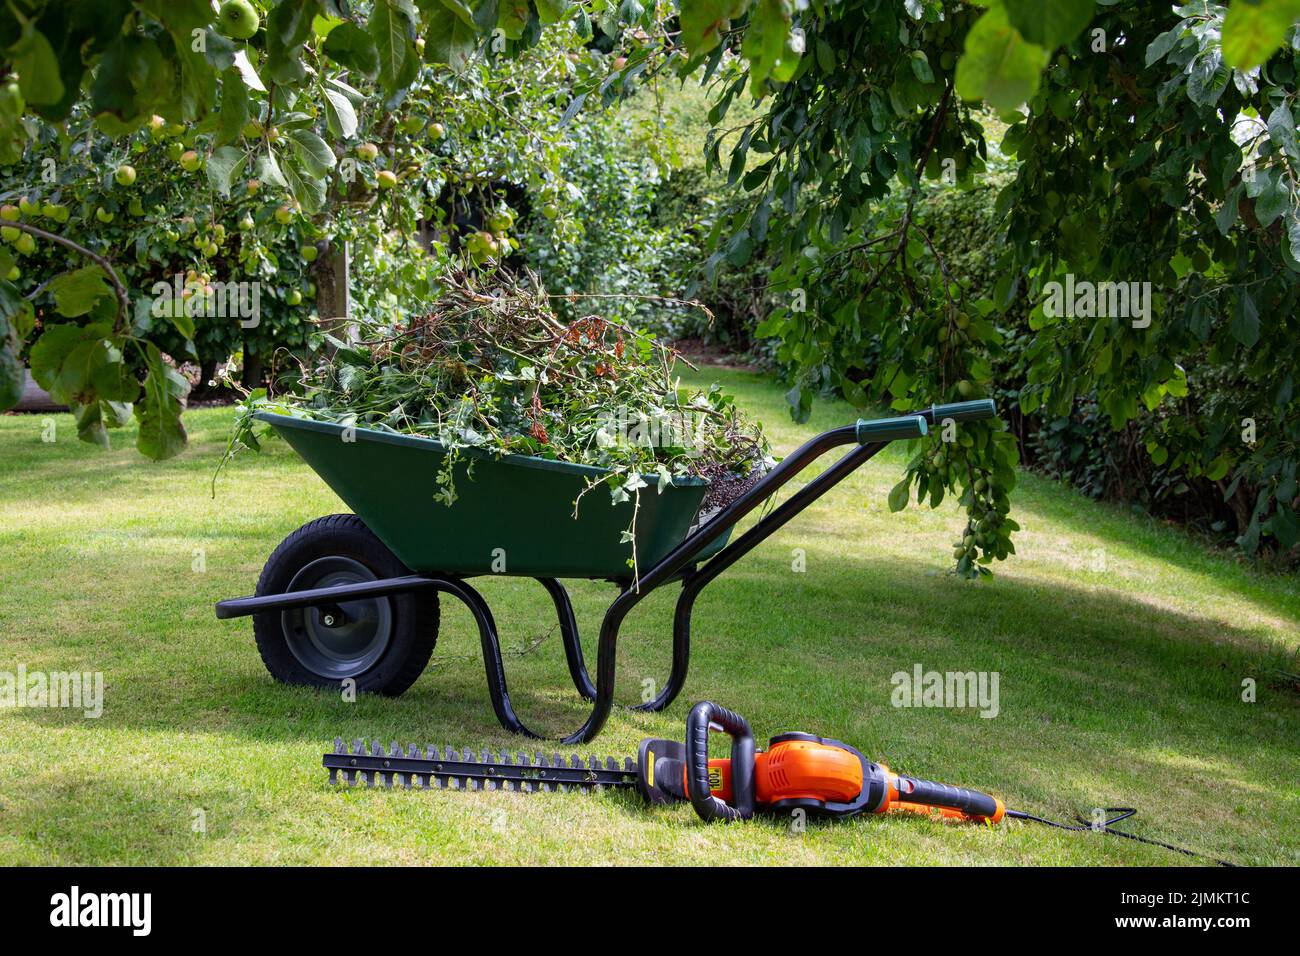 Gardening - Wheelbarrow full of hedge cuttings next to an electric hedge trimmer. Stock Photo